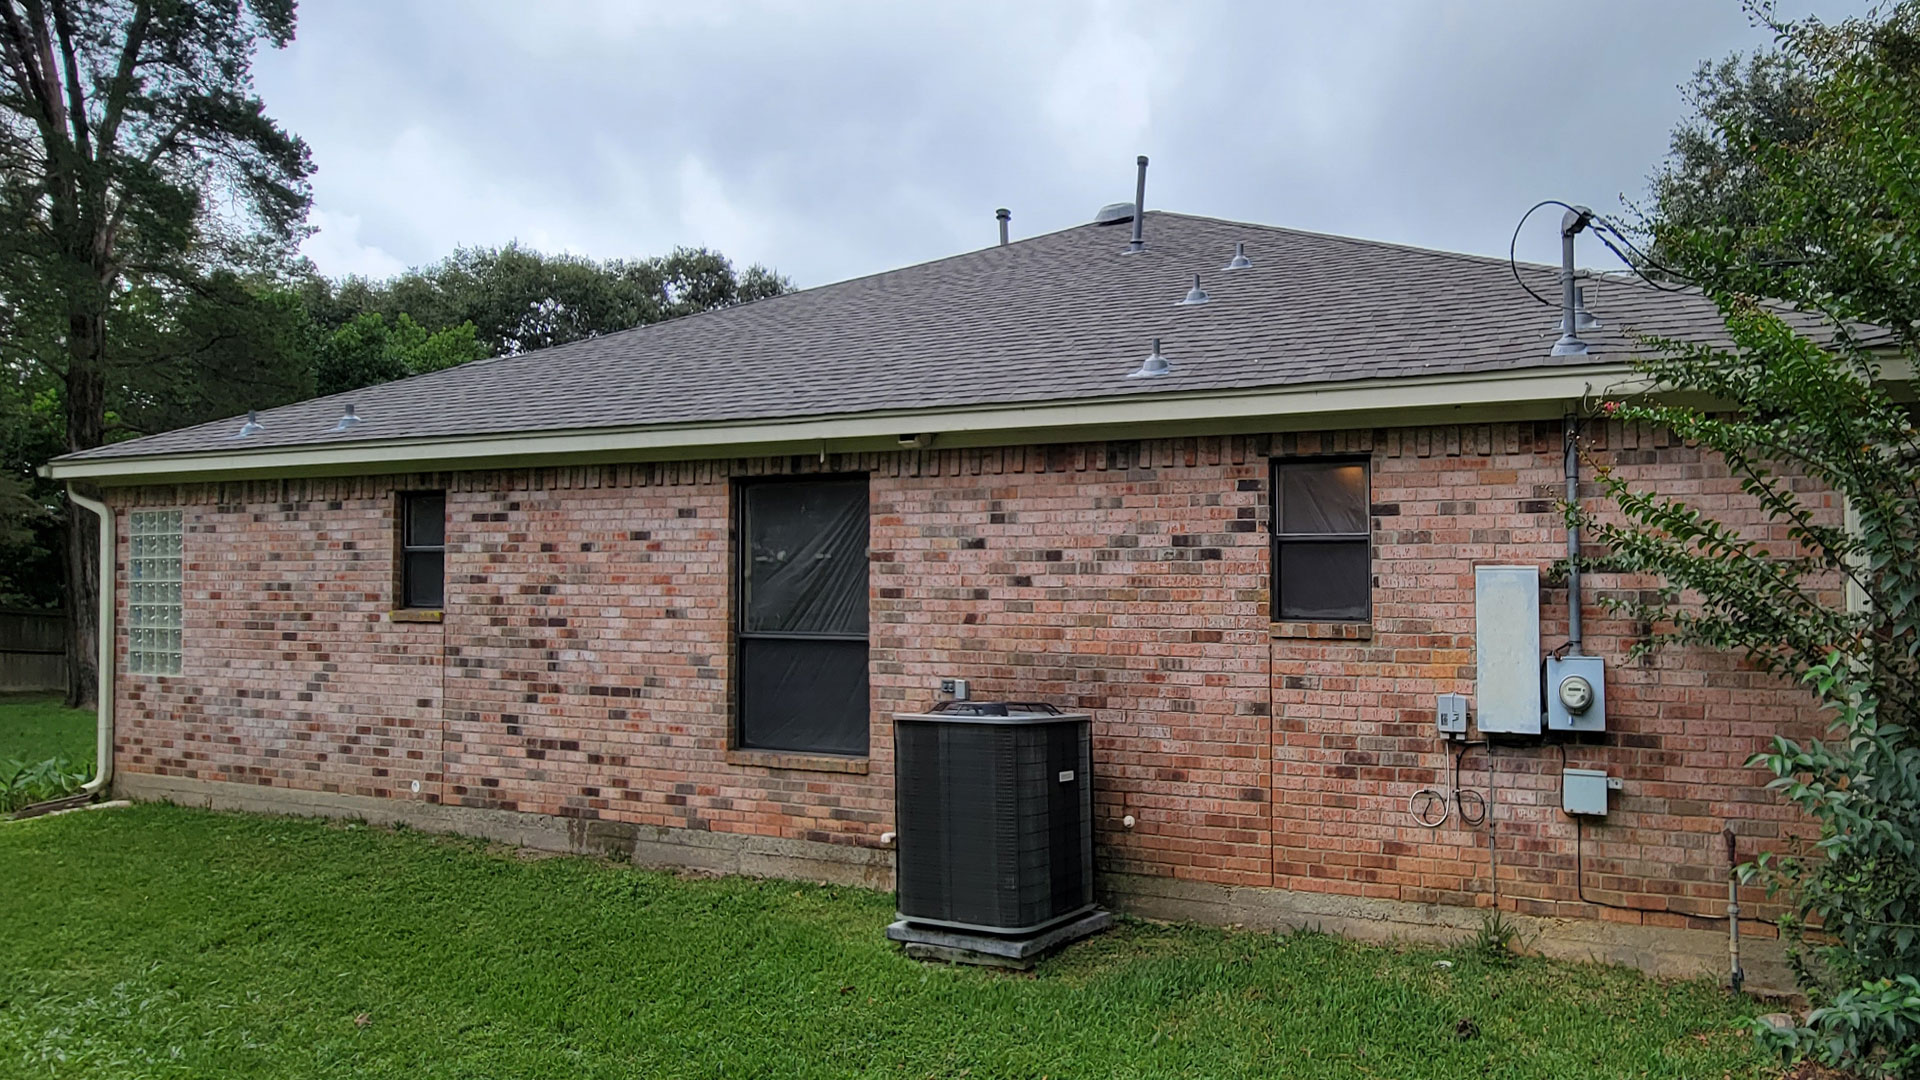 The roofing job showed from the backyard. Certainteed's ClimateFlex® - Colored in weathered wood. And Shadow Ridge® plus Solar Power Attic Vents installed in Tomball, Texas (a city between Cypress and Spring in Northern Houston).